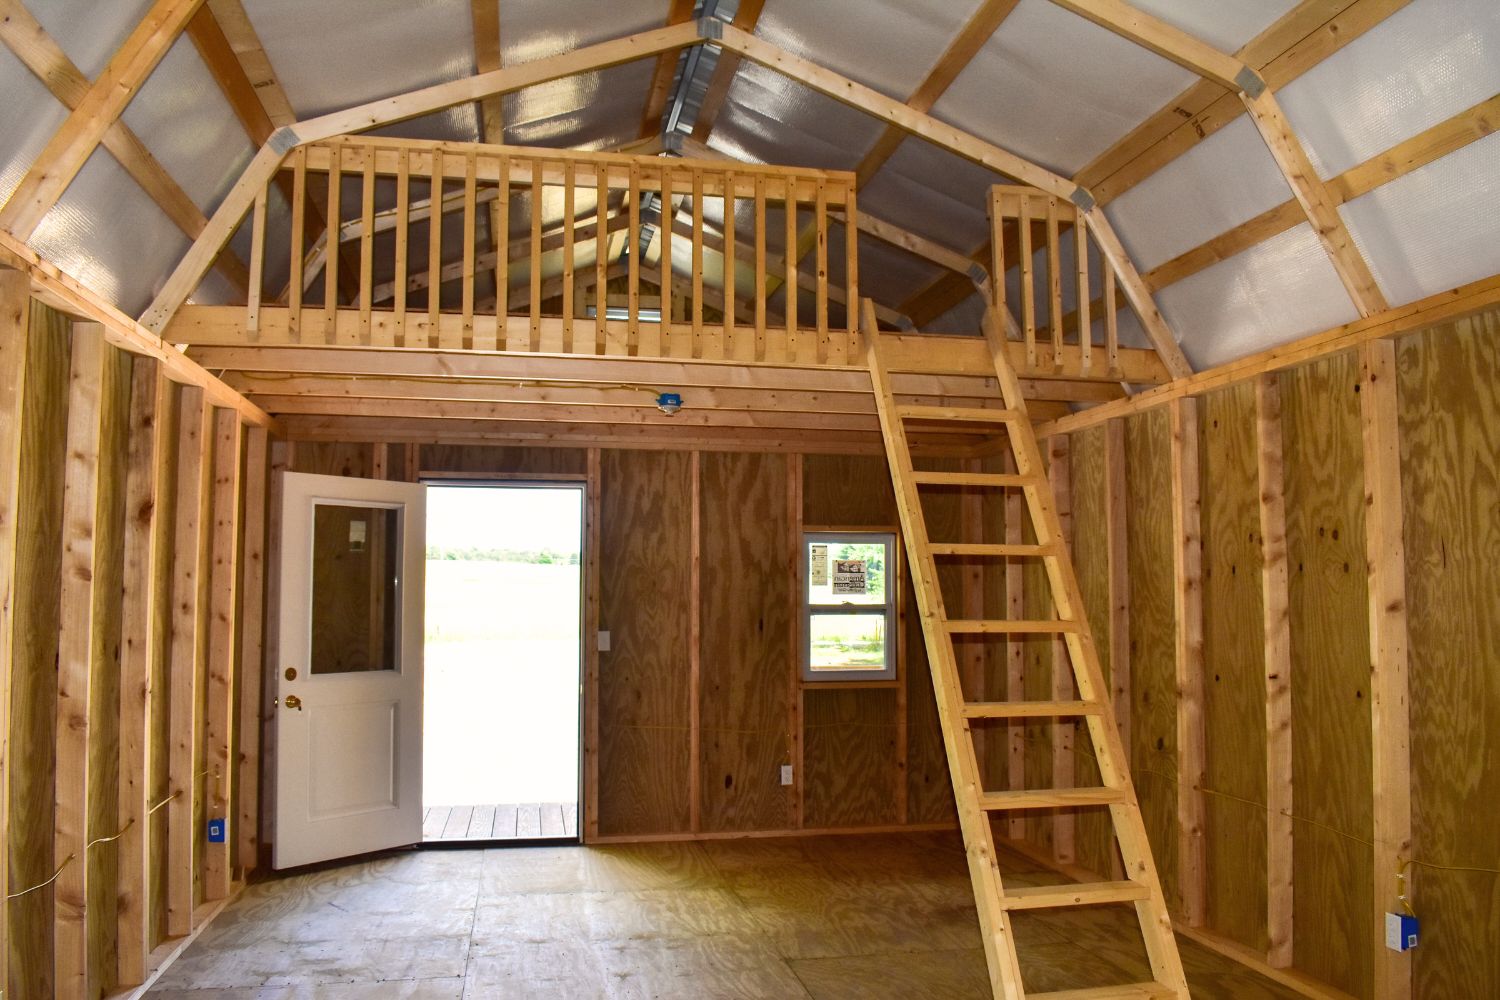 Lofted Barn Cabin Features And Benefits Goldstar